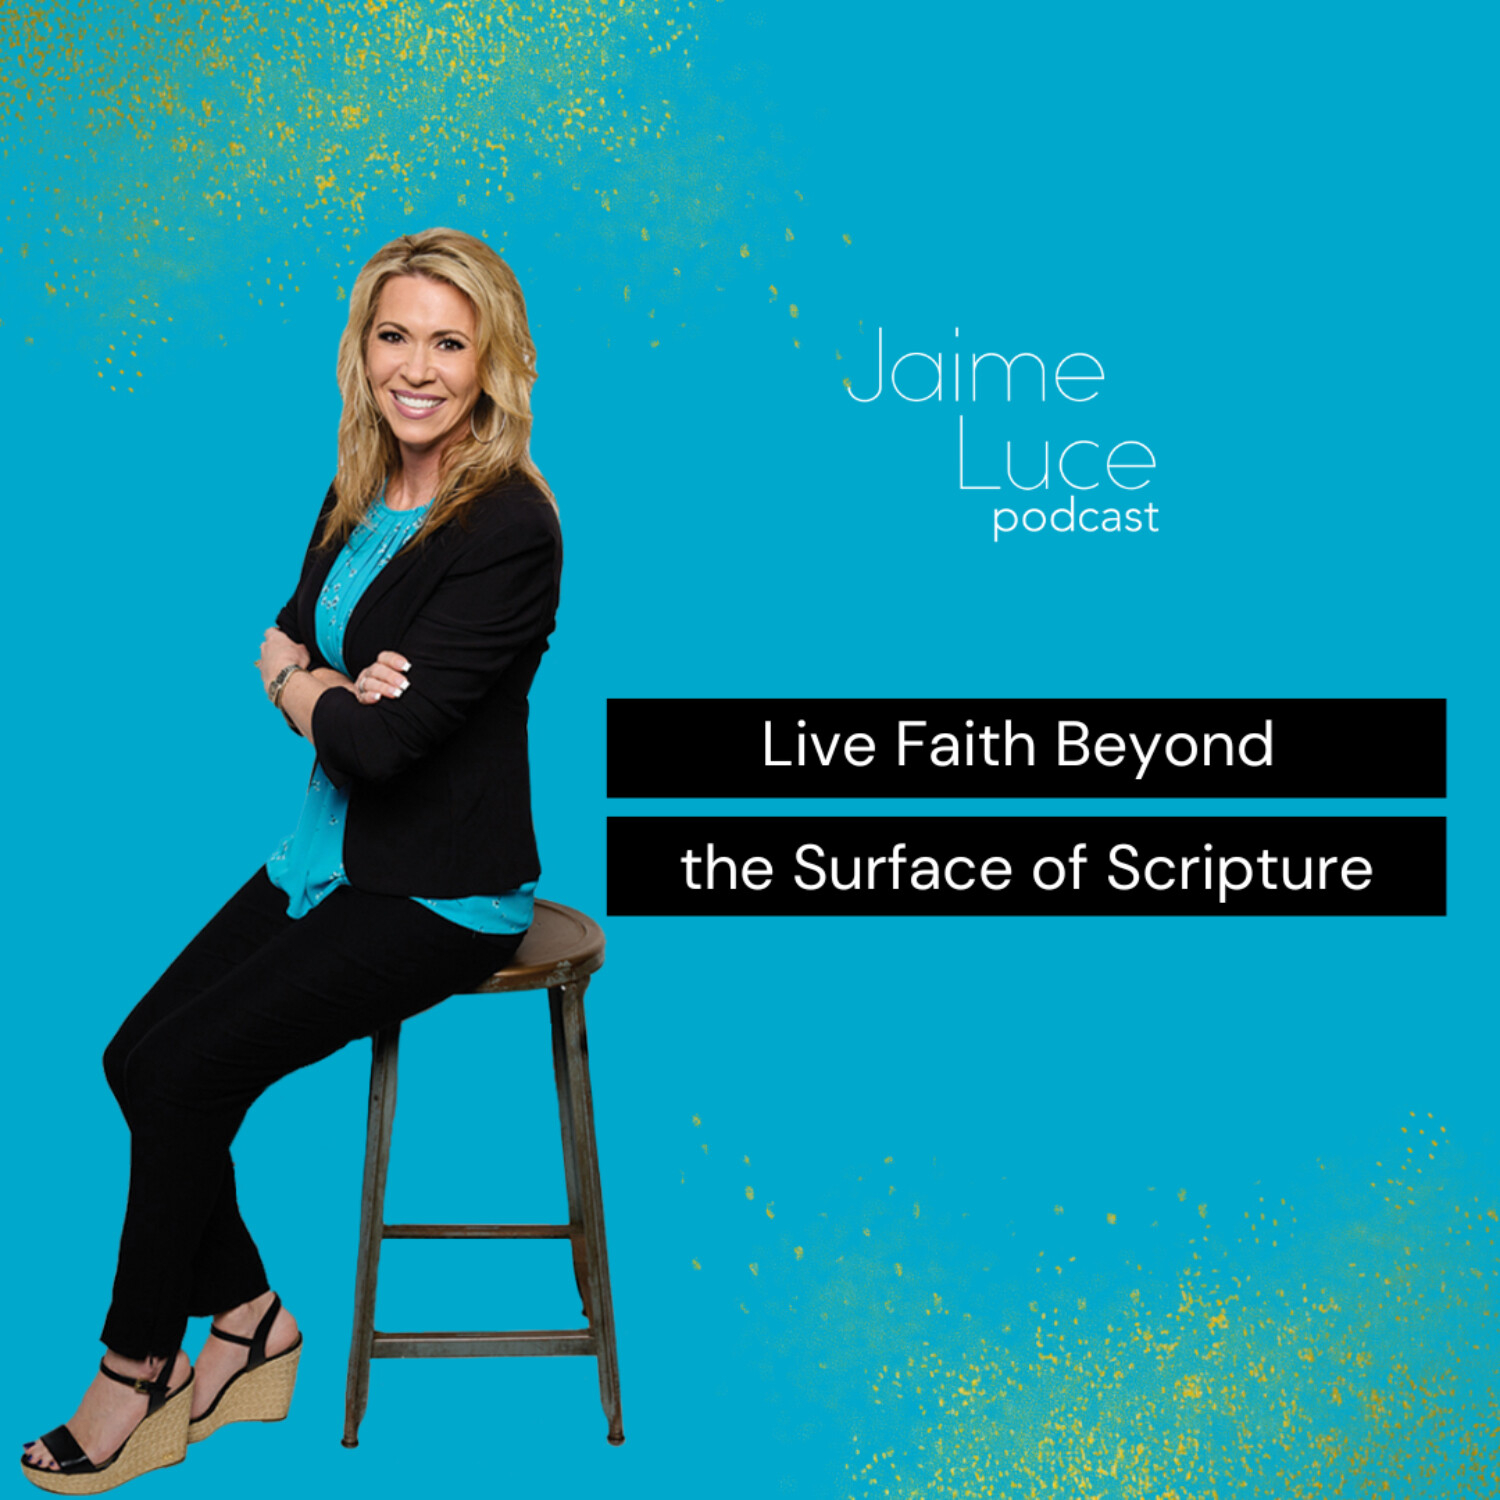 Live Faith Beyond the Surface of Scripture